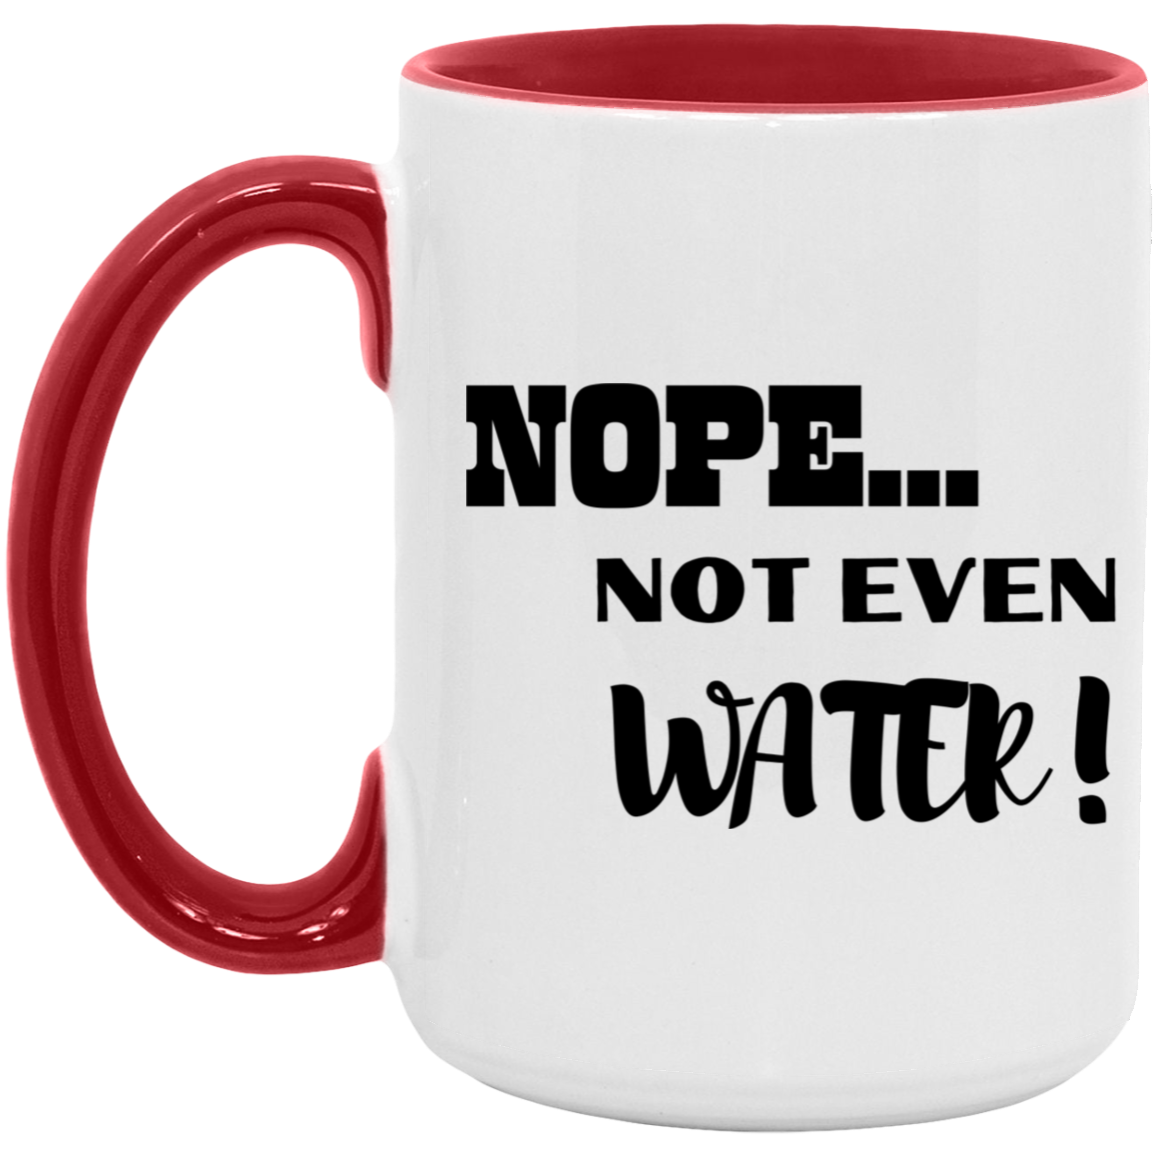 NOPE...NOT EVEN WATER! 15oz. Accent Mug (MORE COLORS)